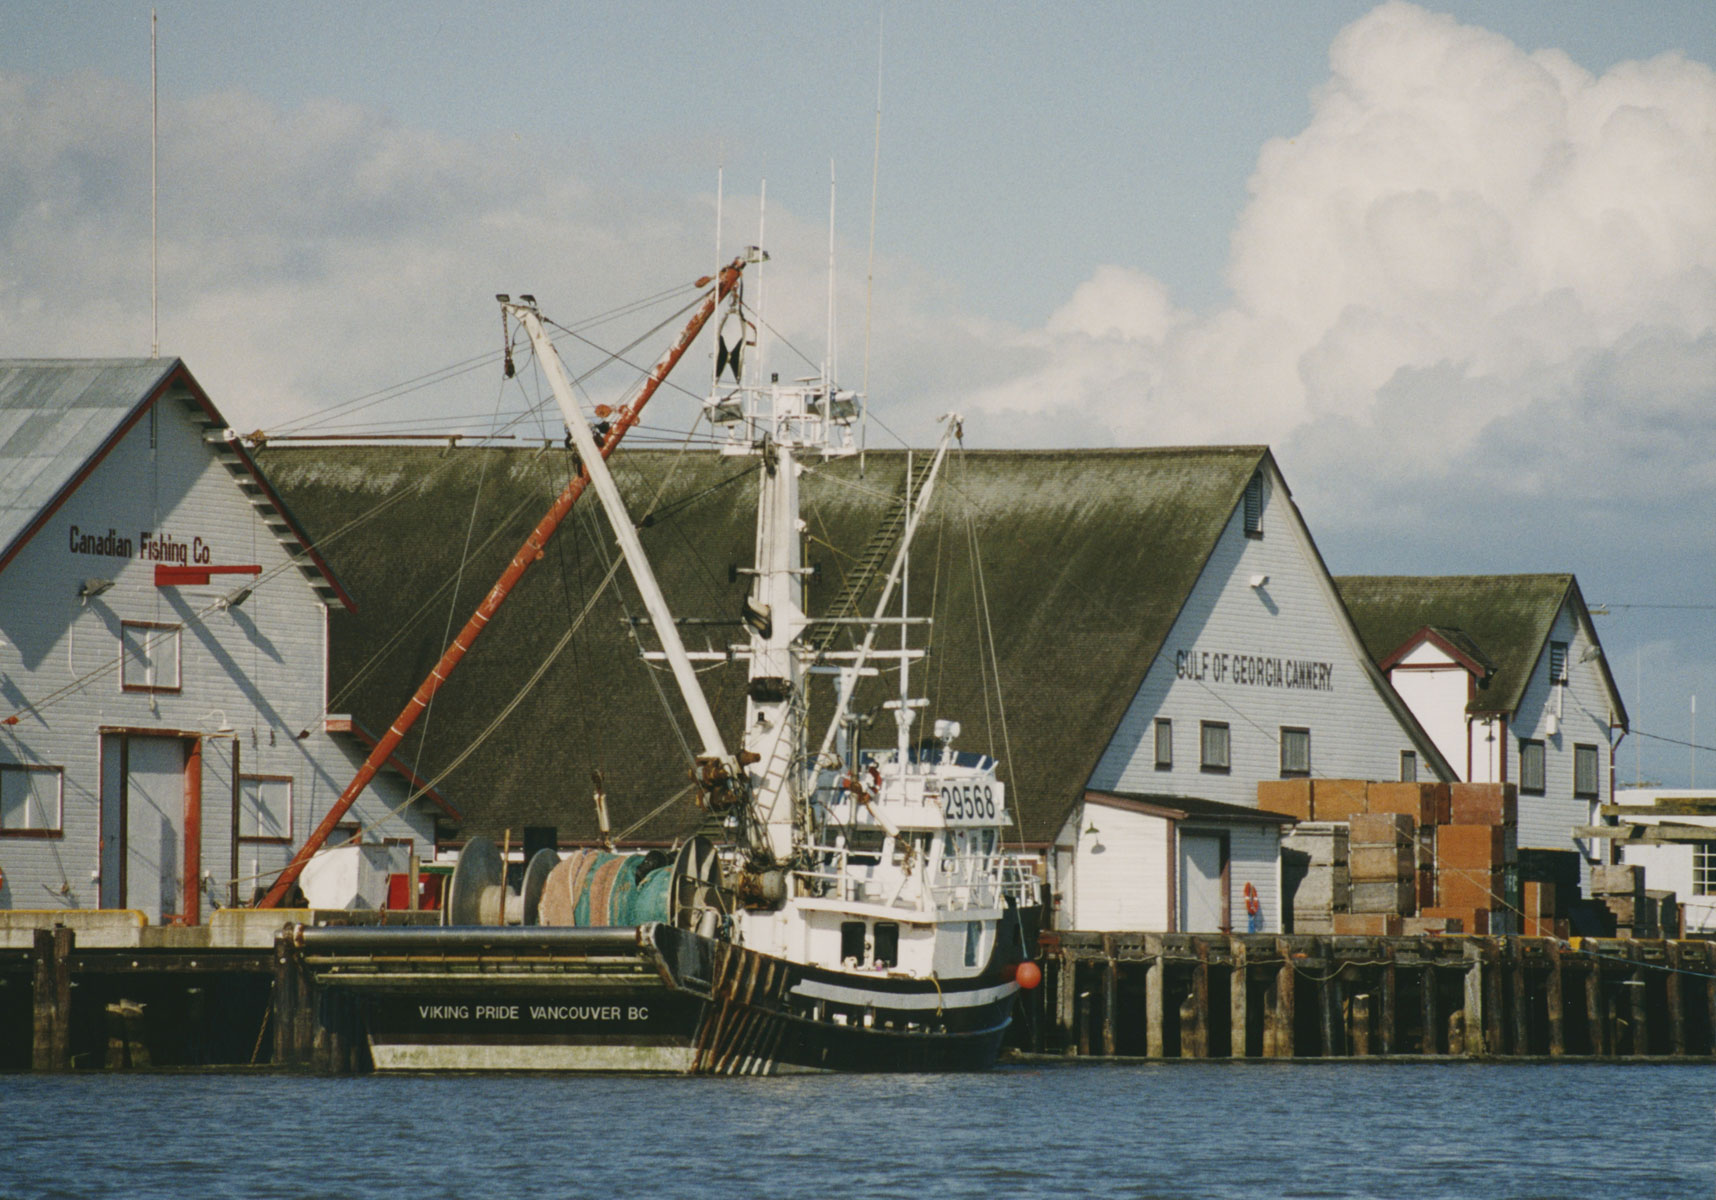 The Gulf of Georgia Cannery with a seine boat at the dock. The boat's name, Viking Pride, is on the stern. The buildings at the cannery have Canadian Fishing Co. and Gulf of Georgia Cannery painted on them.